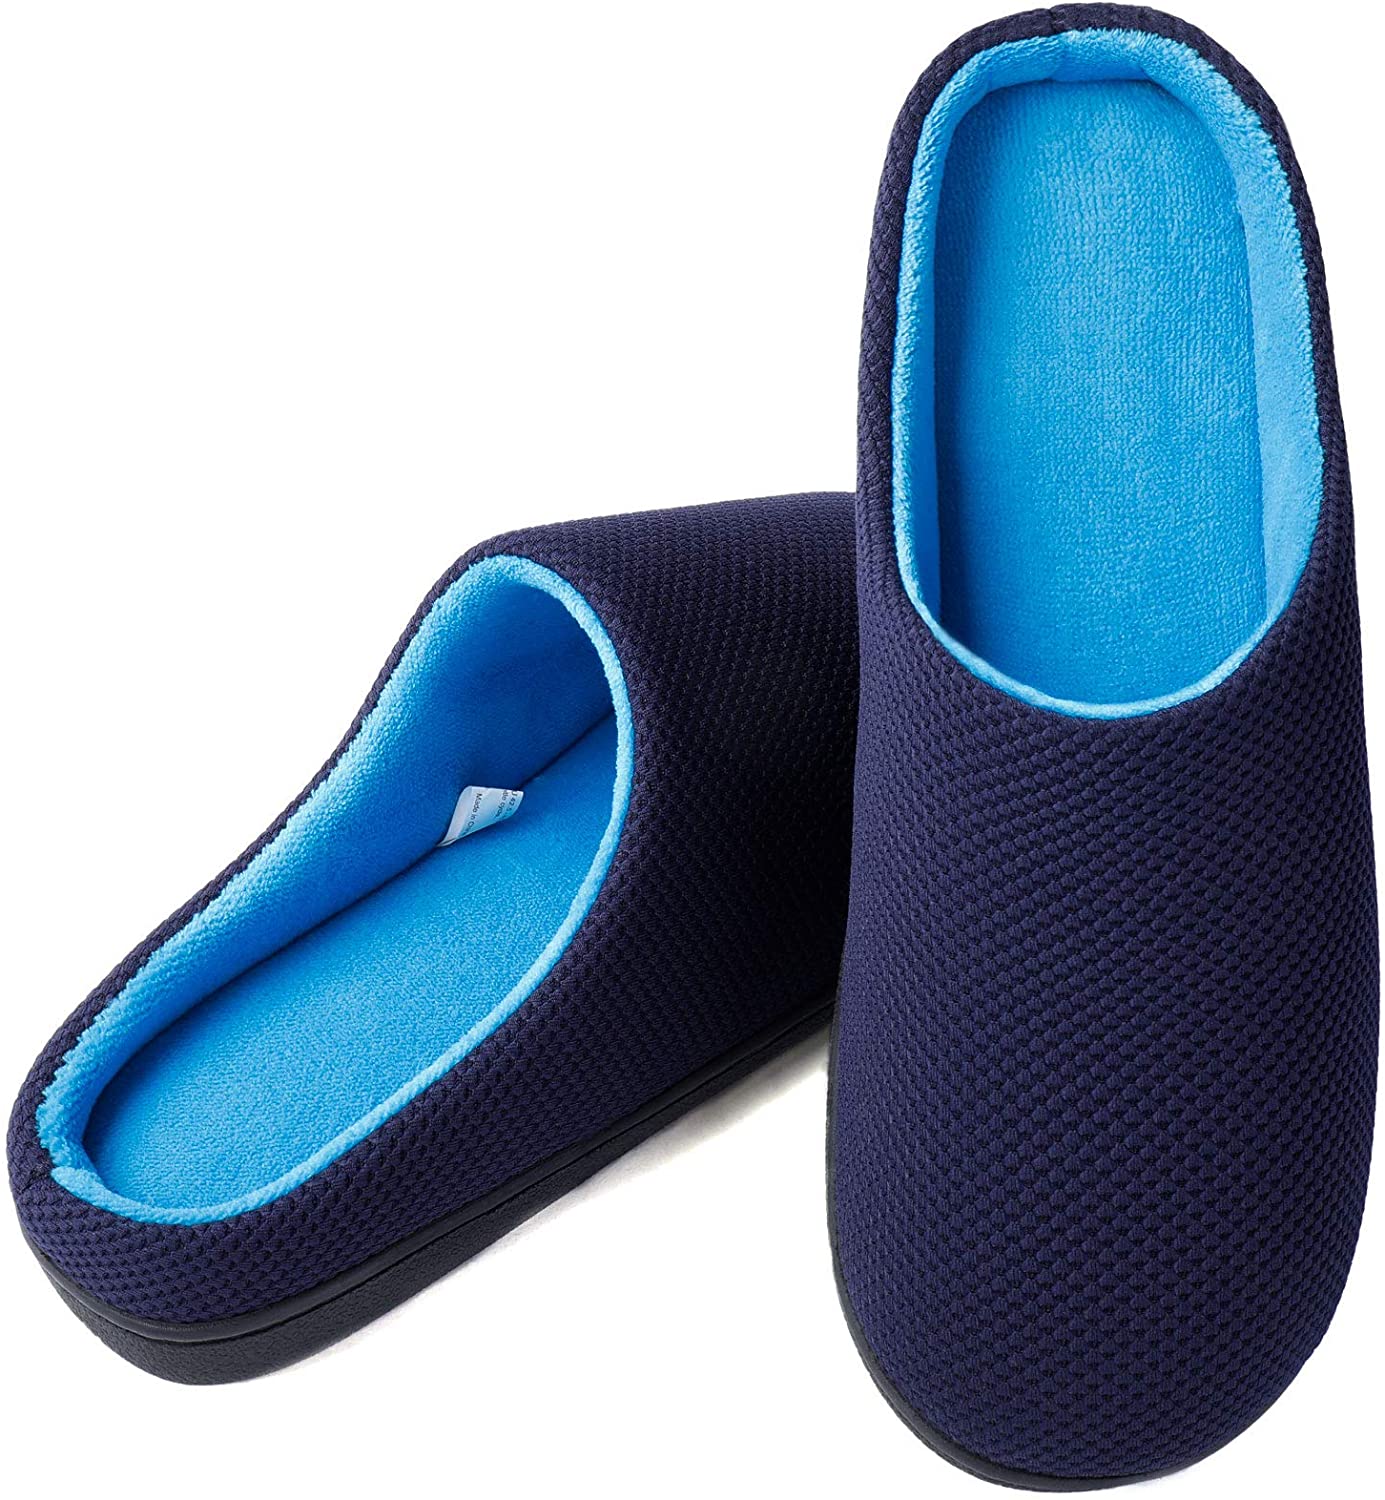 Comfy Memory Foam House Shoes Wishcotton Mens Classic Two-Tone Slippers